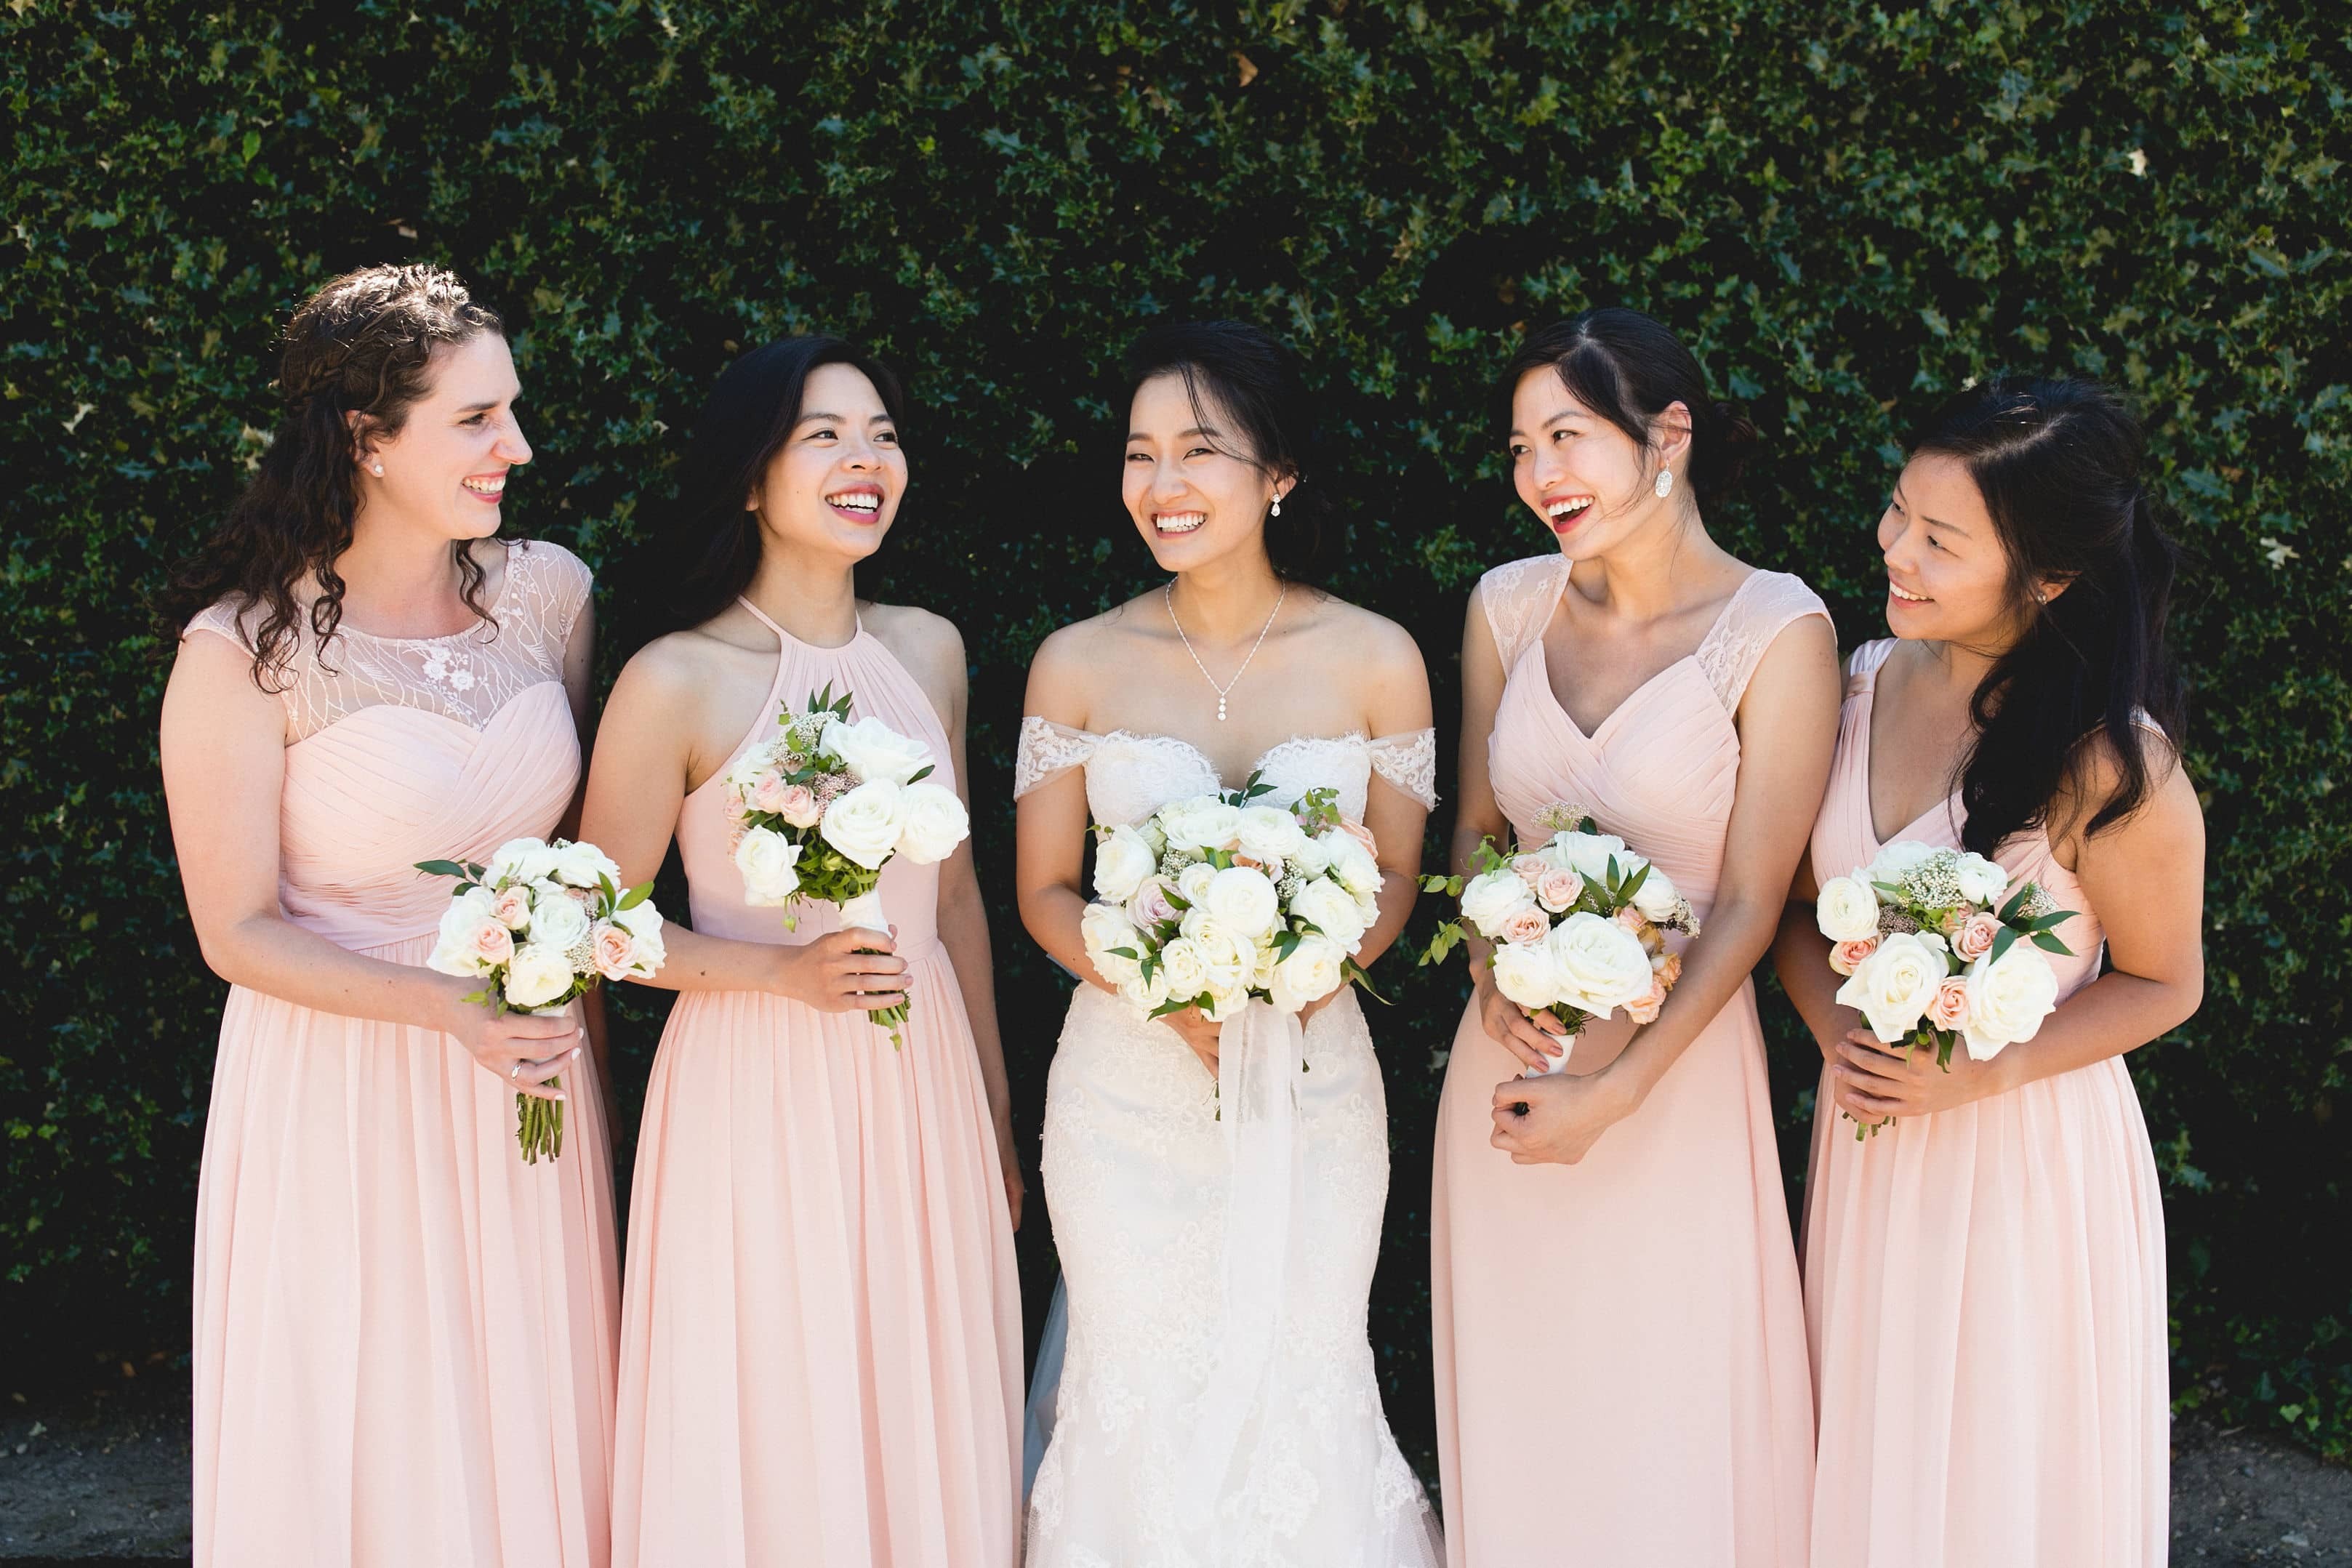 6 Tips for Choosing the Right Bridesmaids Dresses